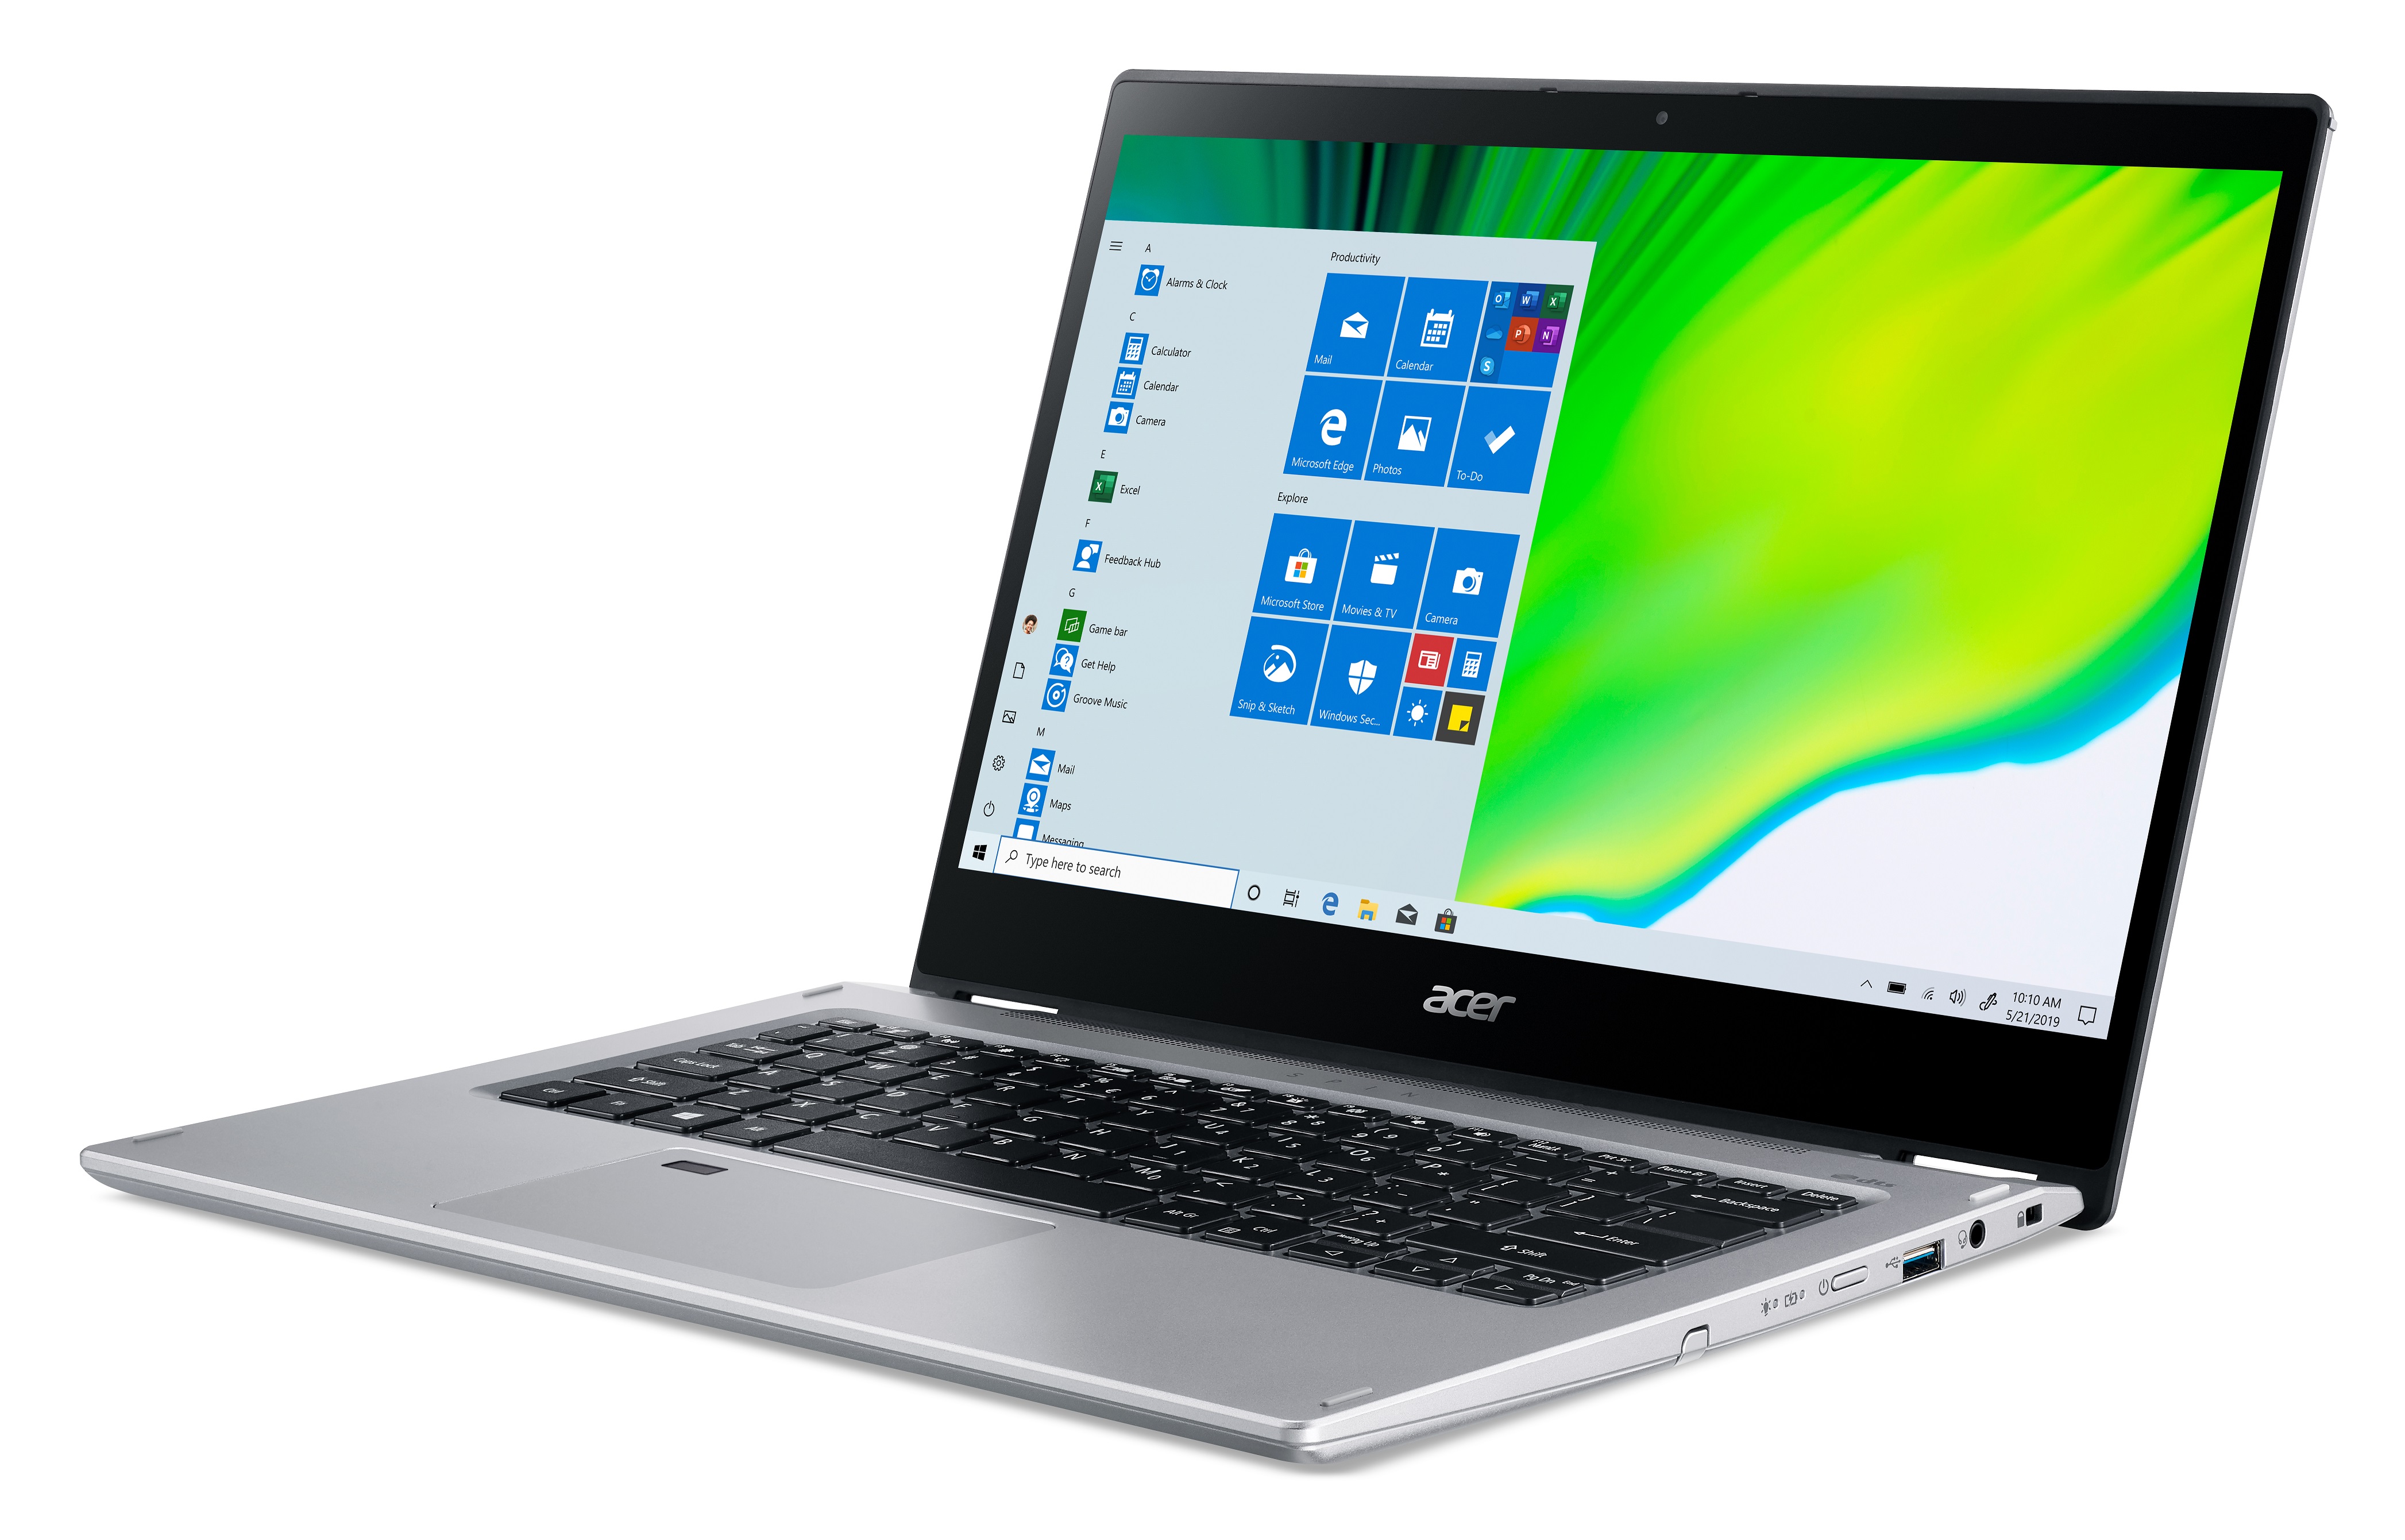 Acer Spin 3 Thin and Light Convertible 2-in-1, 14" HD Touch, AMD Ryzen 3 3250U Dual-Core Mobile Processor with Radeon Graphics, 4GB DDR4, 128GB NVMe SSD, Windows 10 in S mode, SP314-21-R56W - image 4 of 8